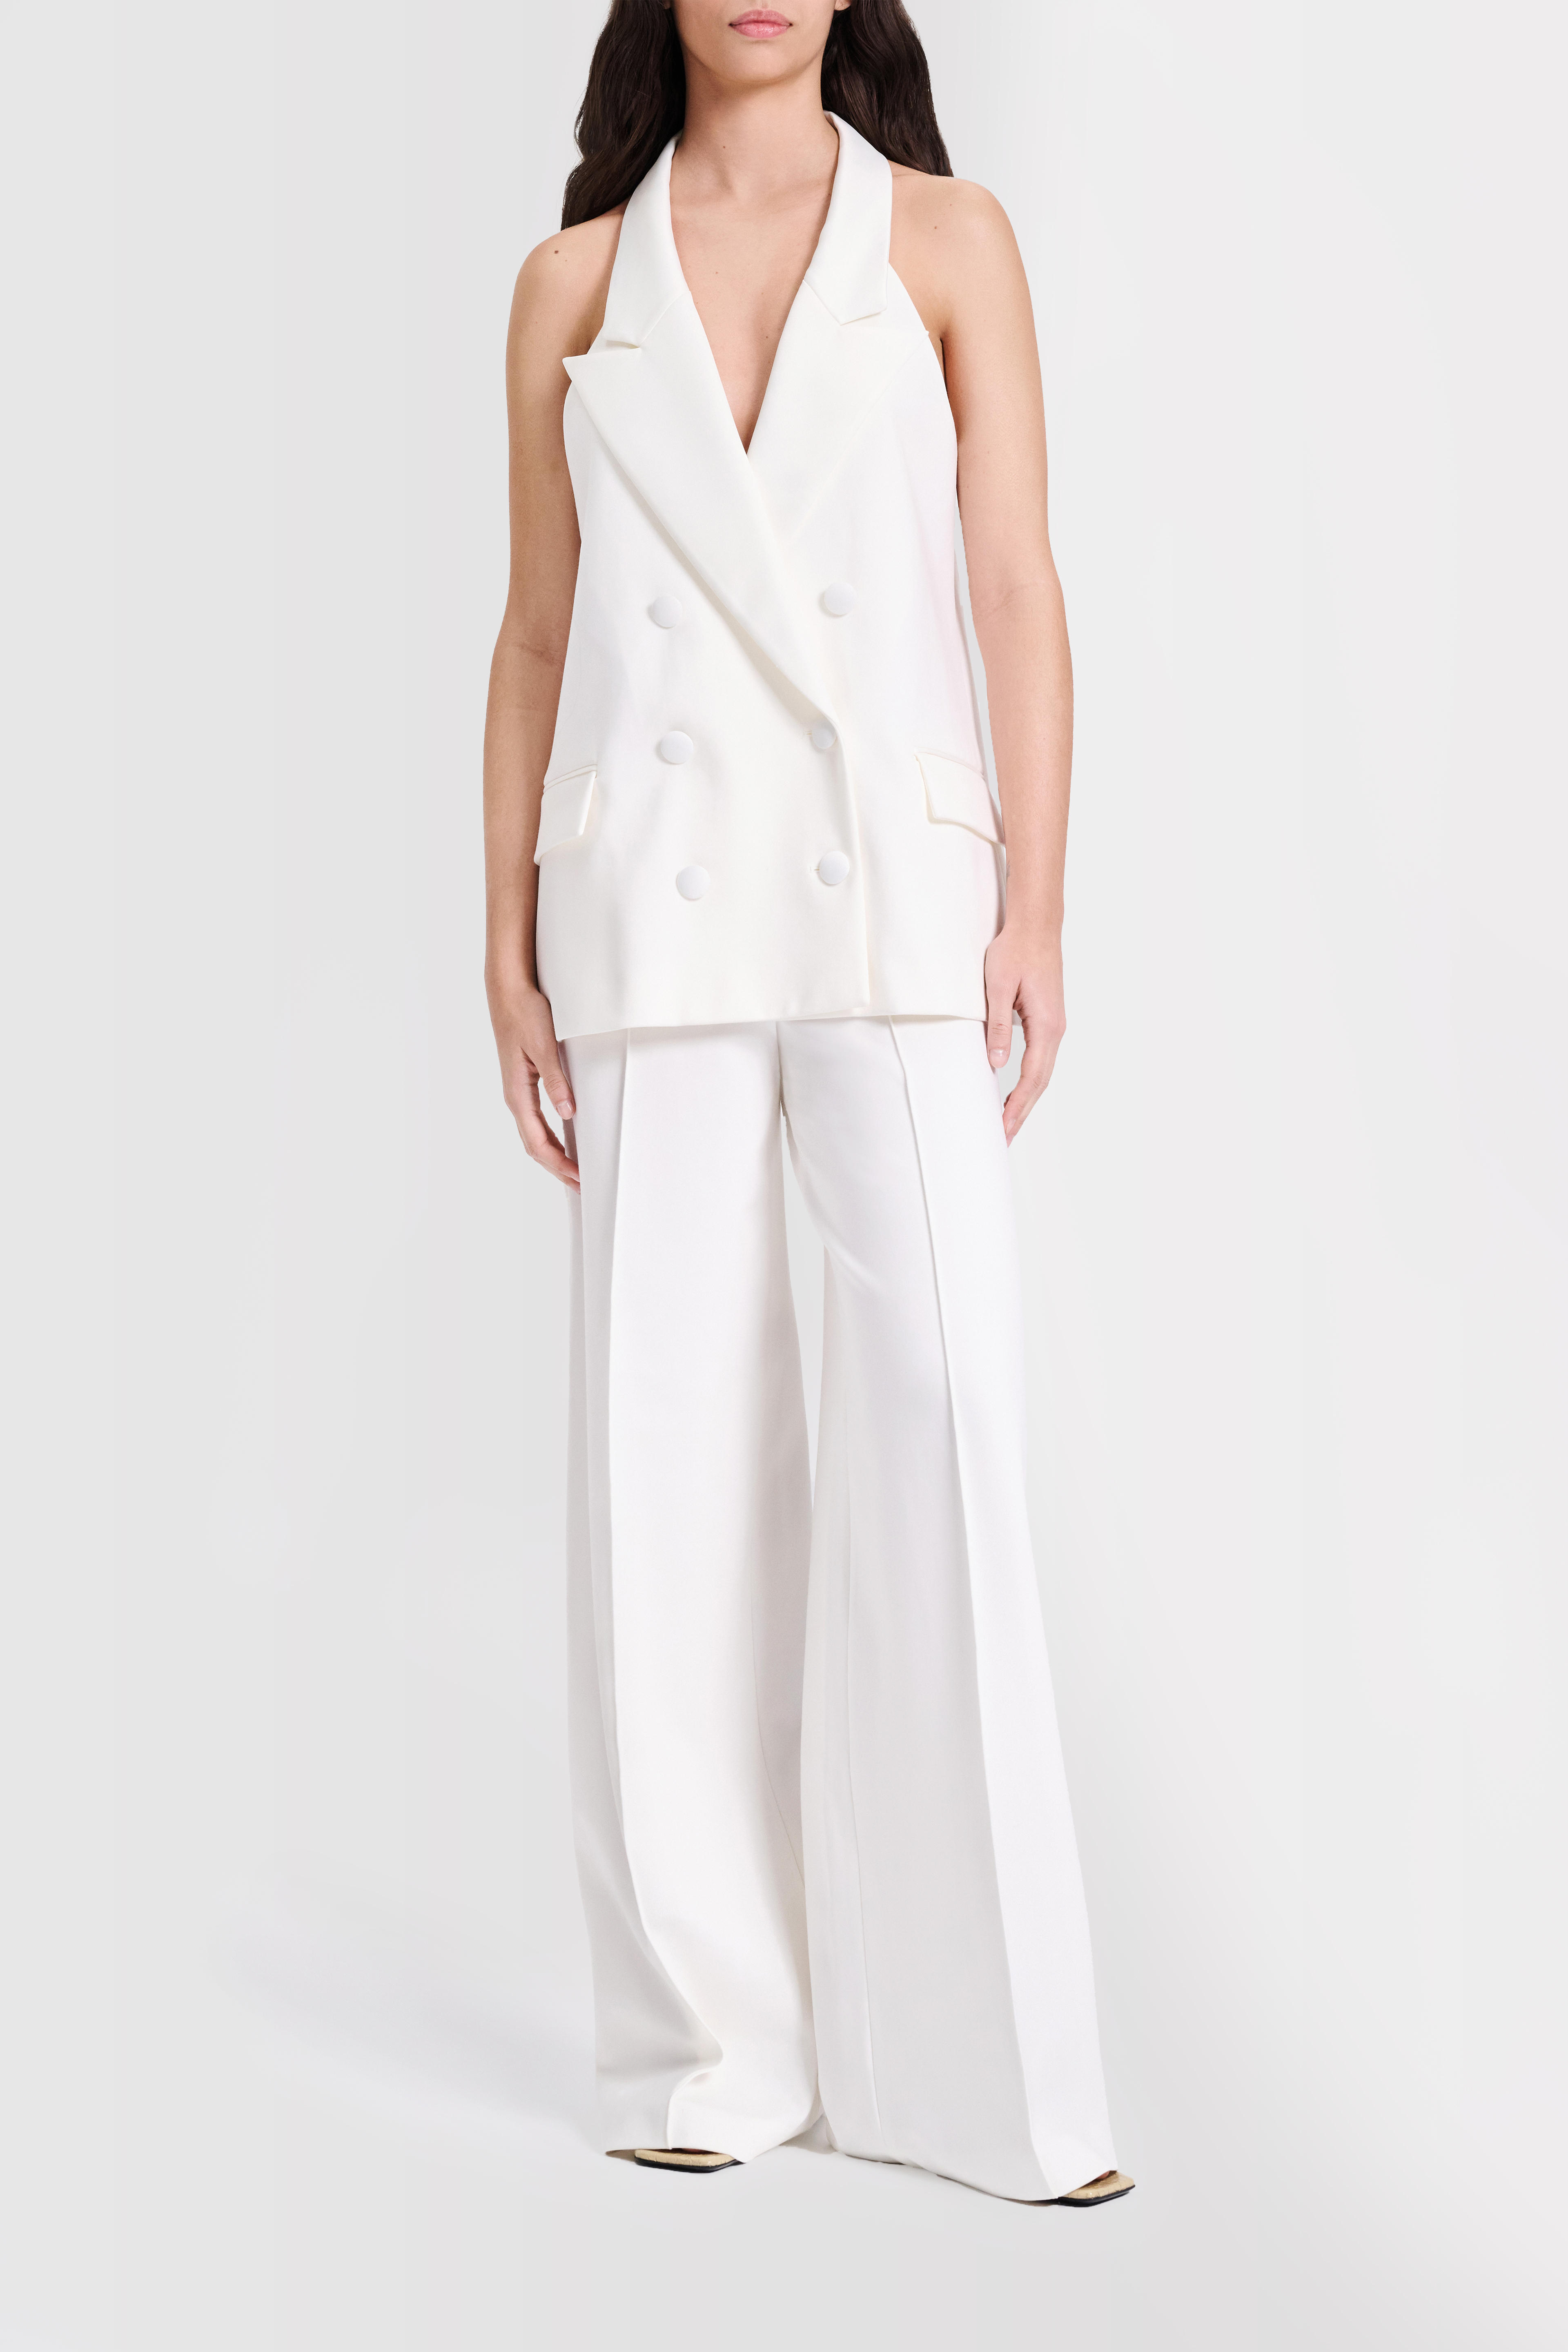 Dorothee Schumacher Double-breasted tuxedo-style